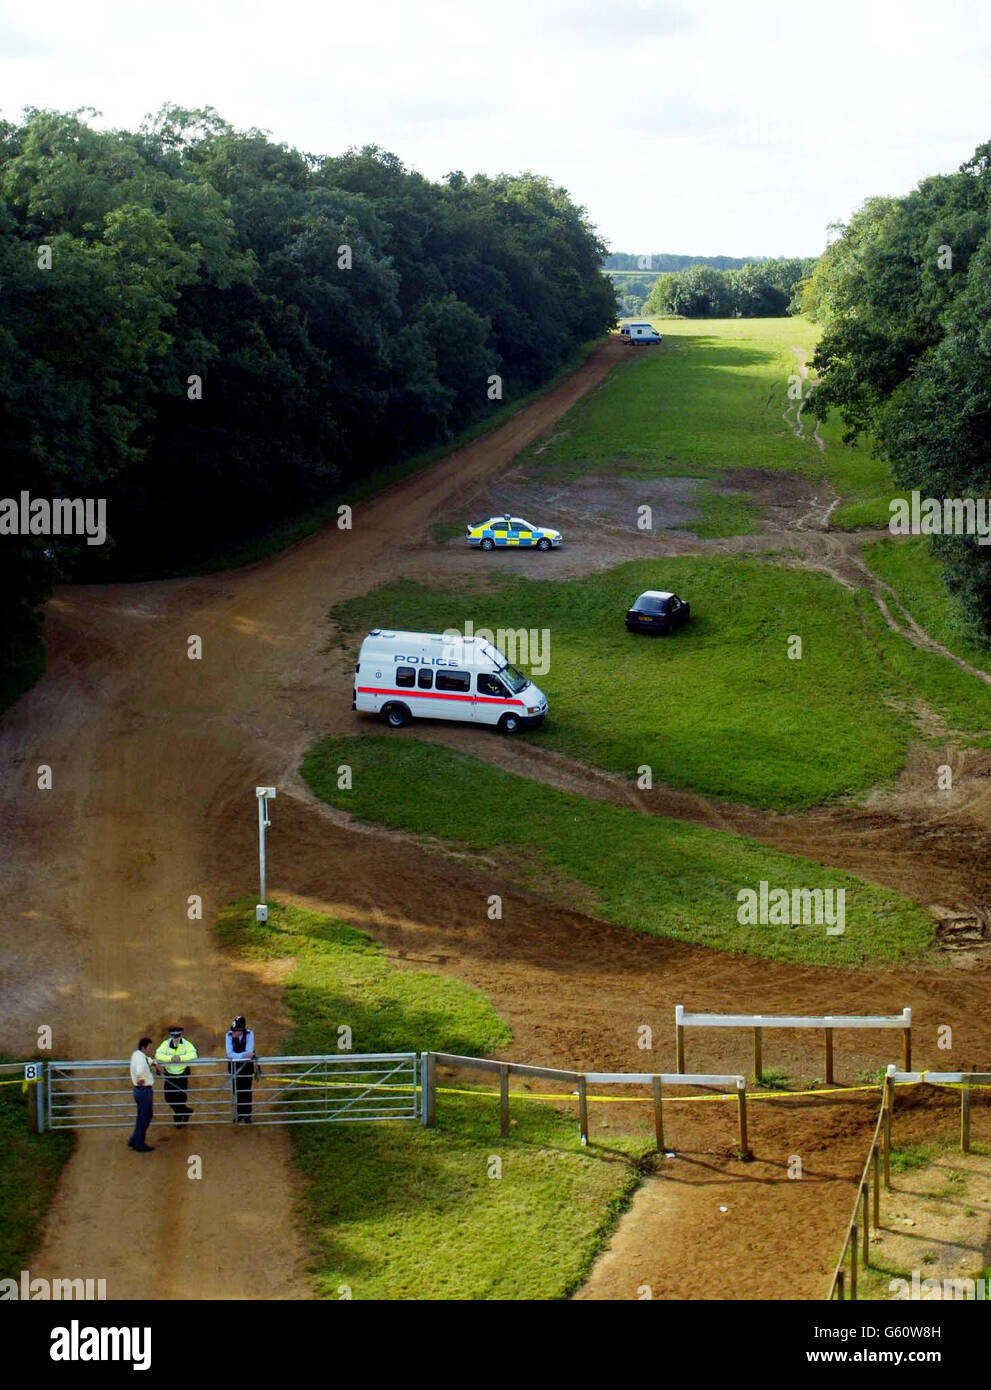 Police and their vehicles stand on the Gallops, Newmarket, Suffolk, where officers searching two mounds of earth said that they had found no traces of the missing girls Holly Wells and Jessica Chapman. * Police forensic experts had been conducting fingertip and visual searches, but a senior detective said that they found just loose mounds of earth with nothing underneath. Holly and Jessica went missing from Soham in Cambridge Sunday August 4. Stock Photo